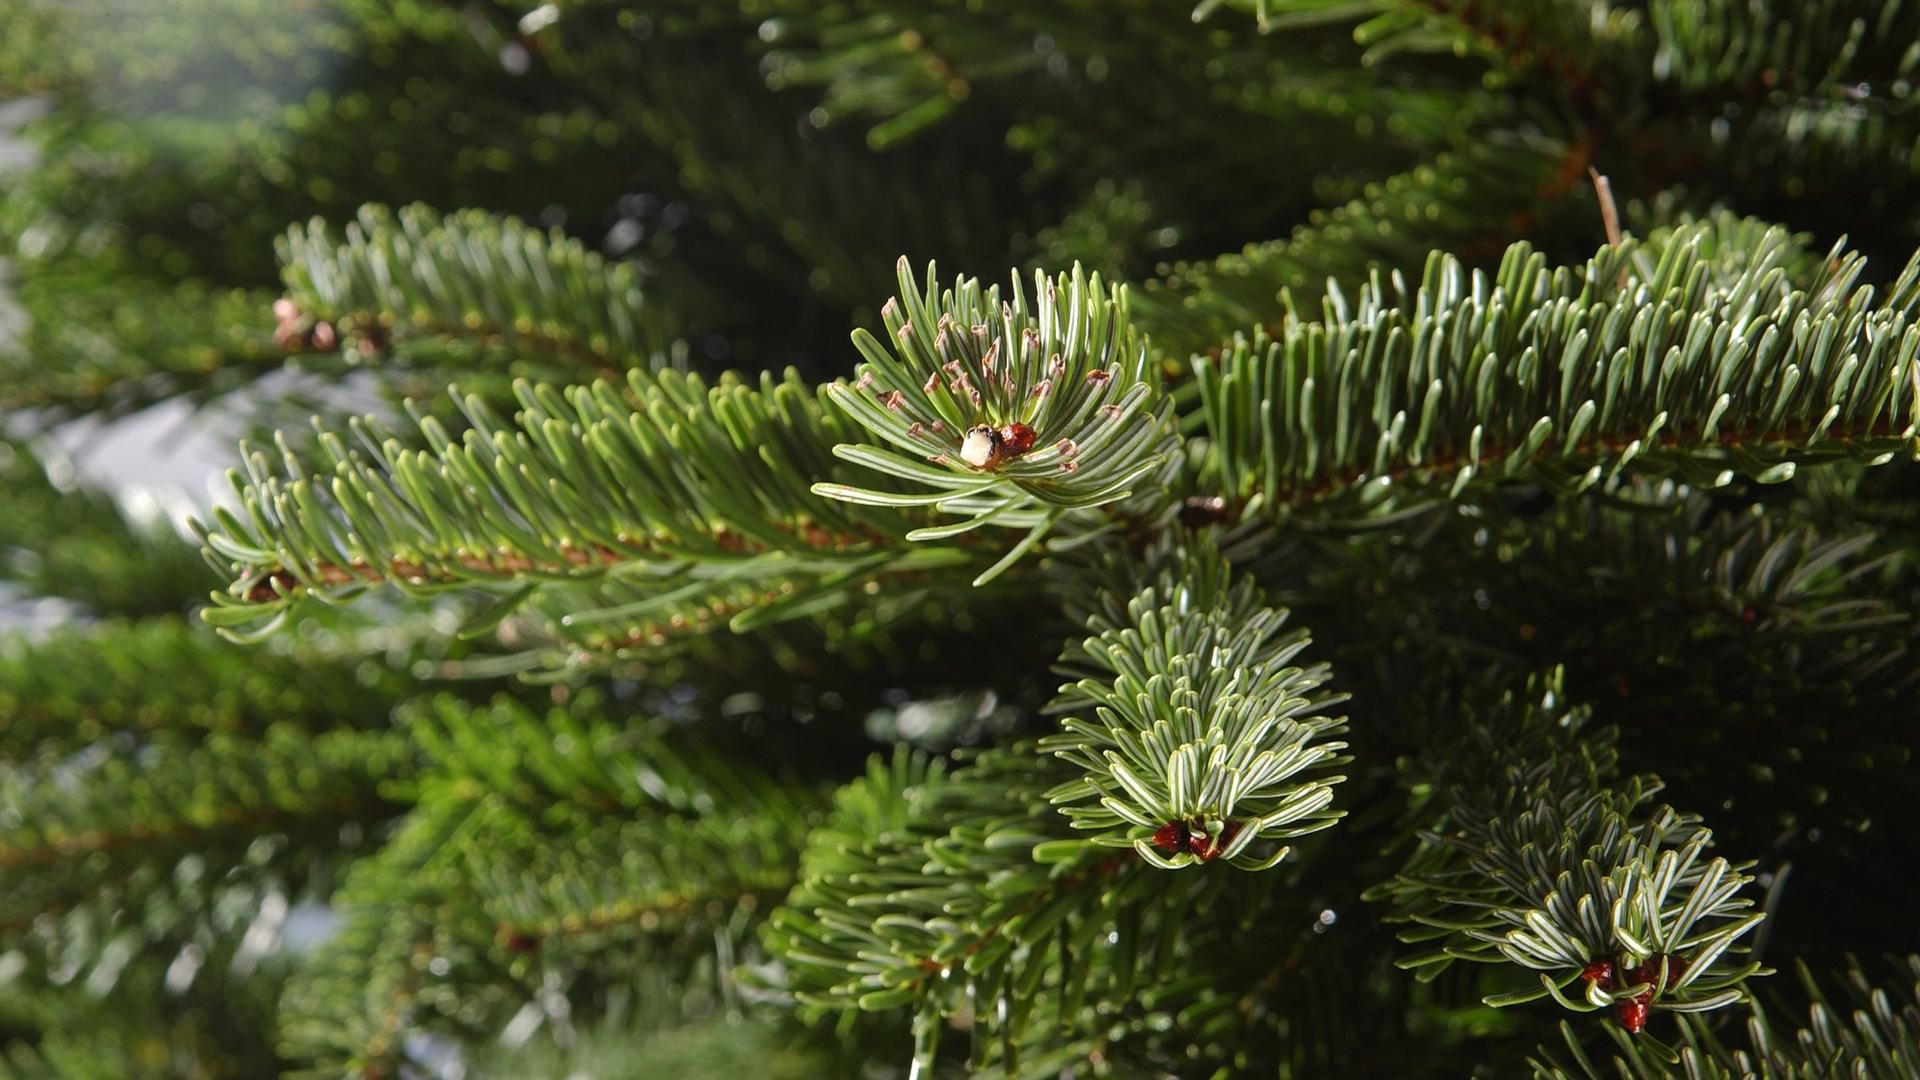 A Christmas tree bough gets its close-up.